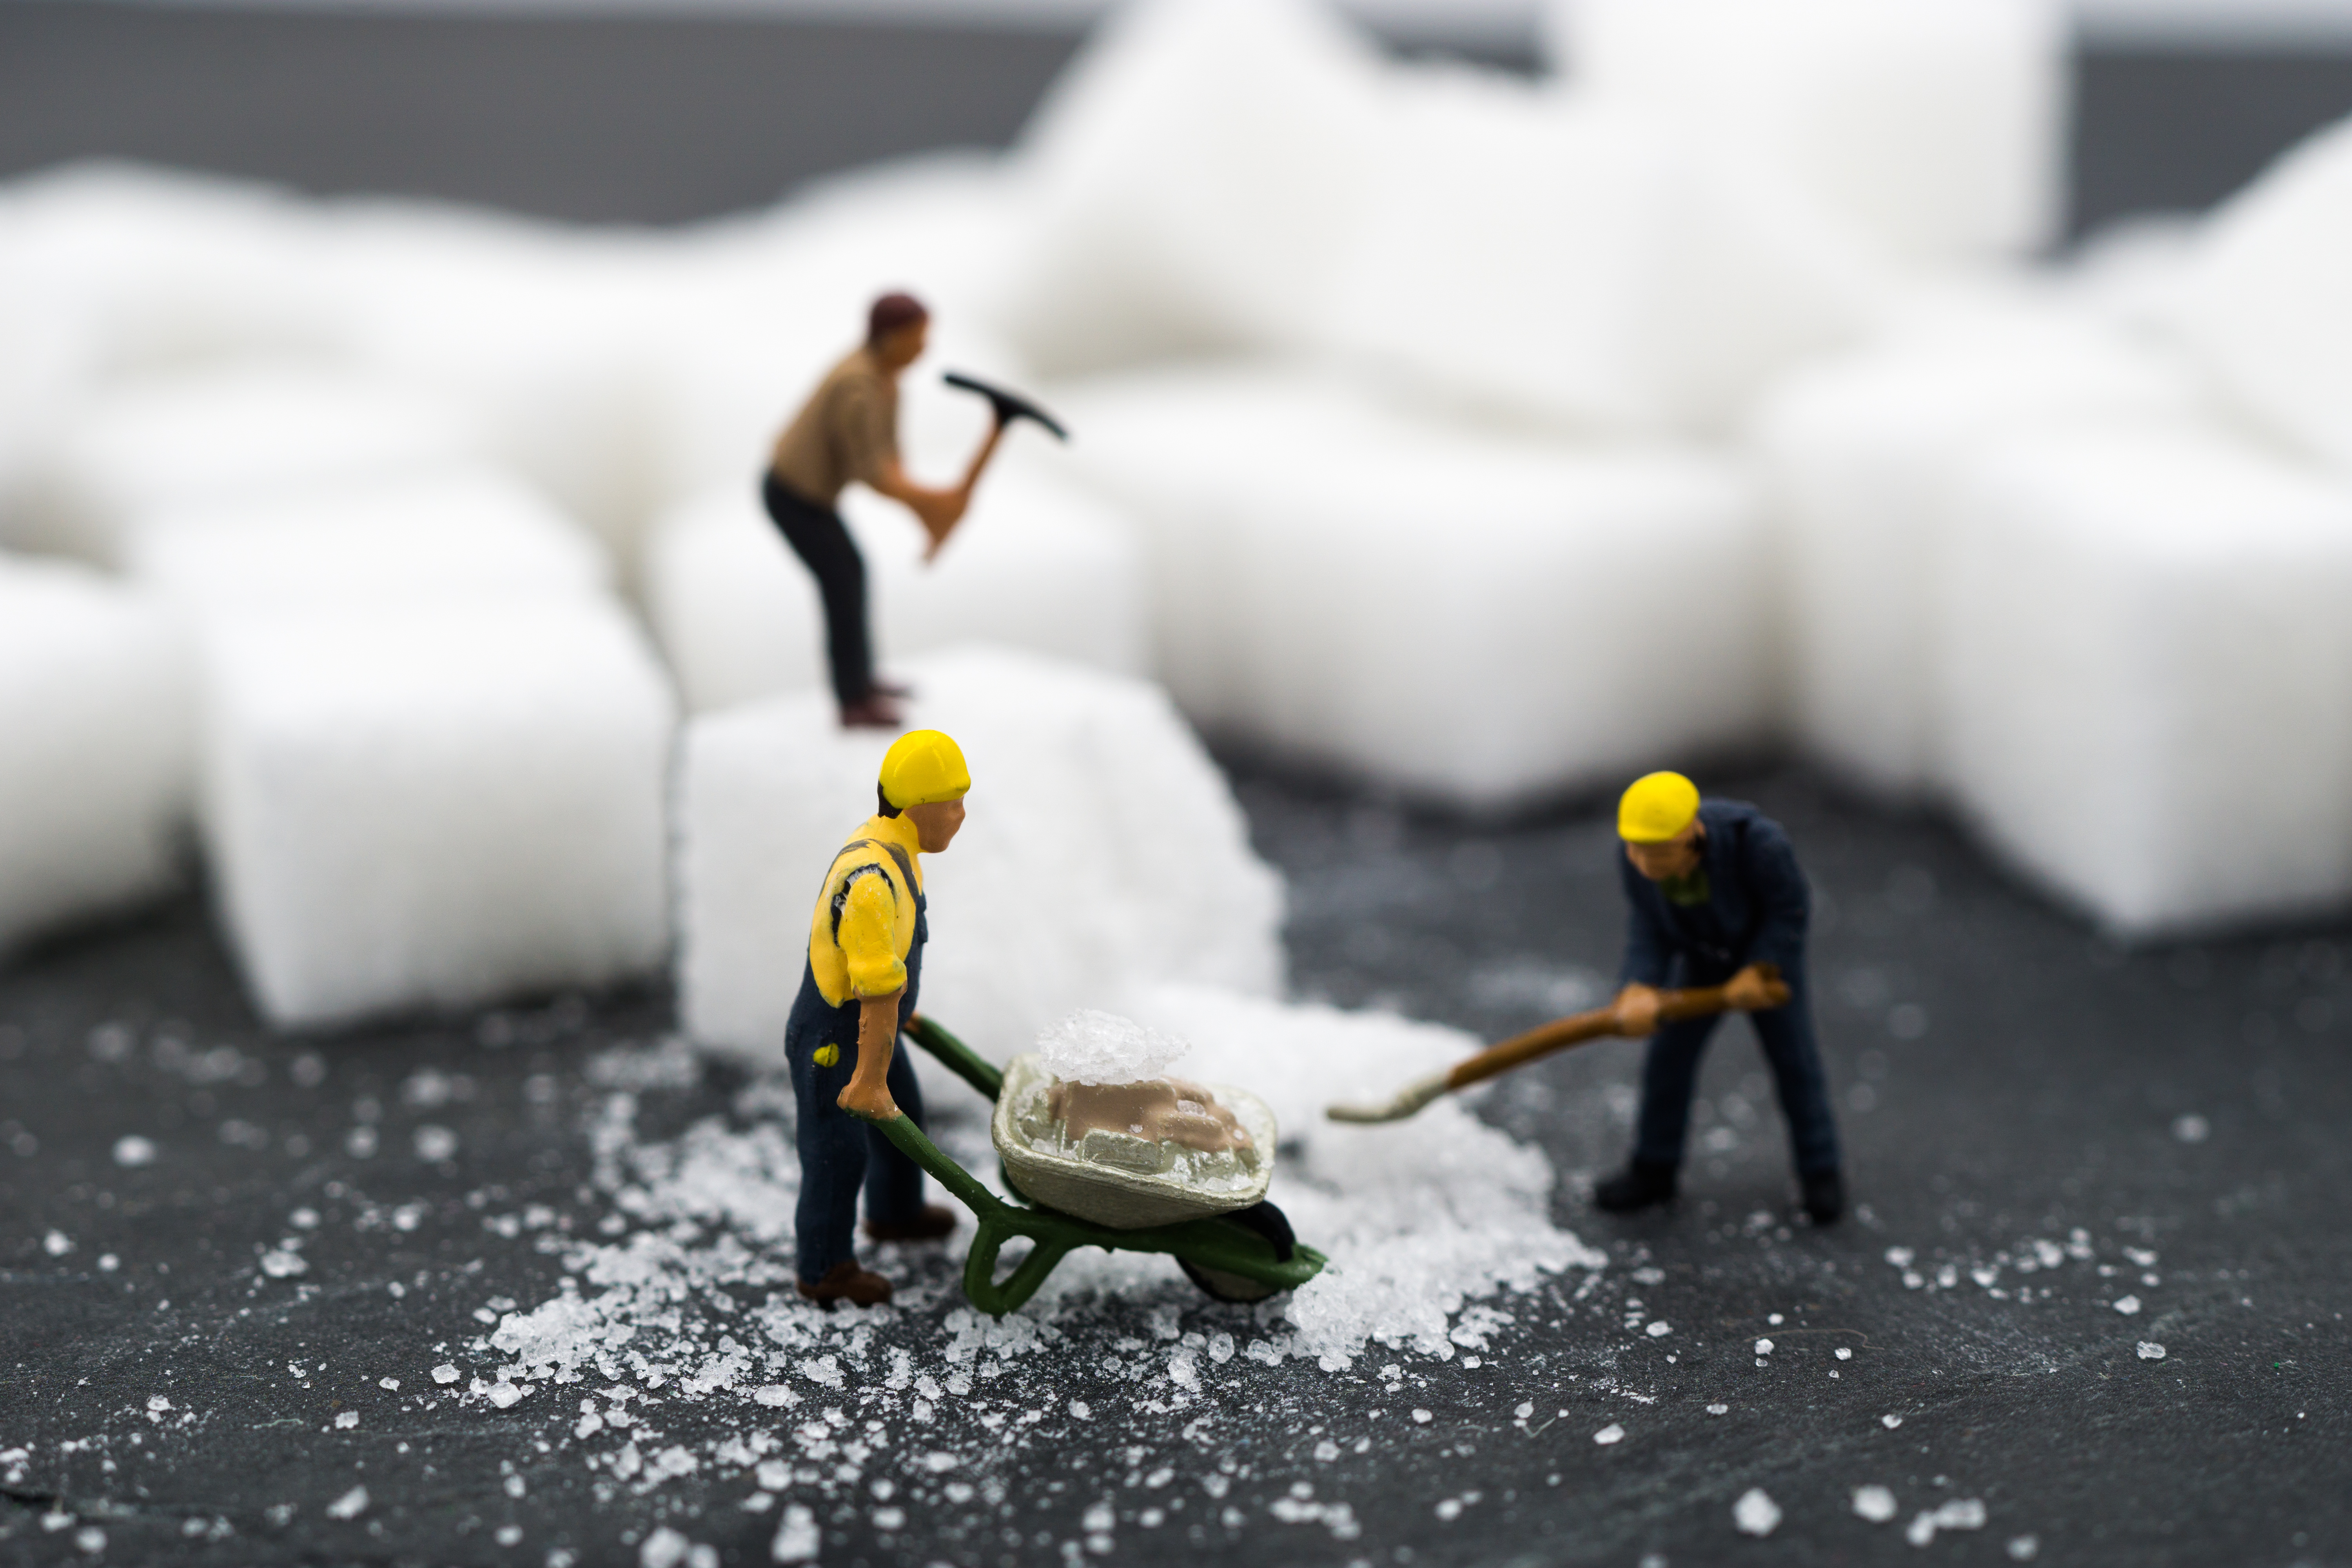 miniature workers with tools standing on sugar cubes